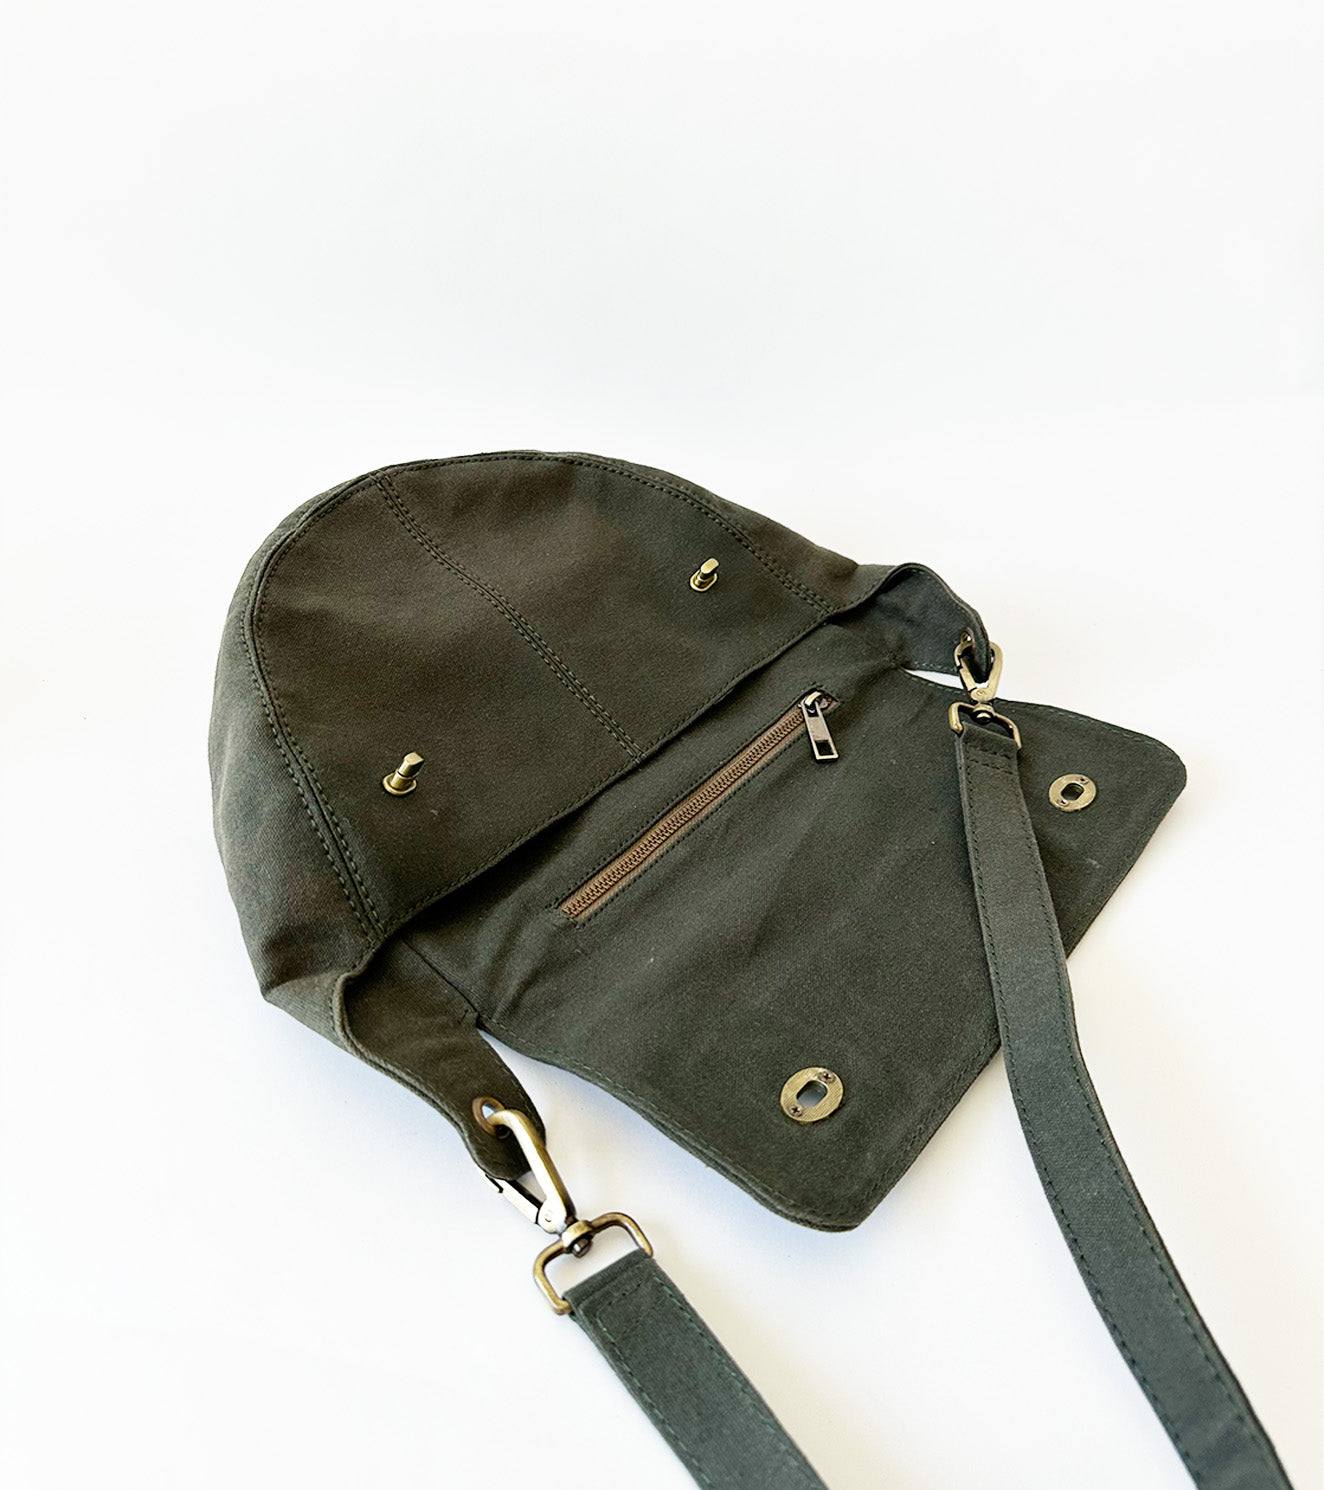 Olive fanny pack